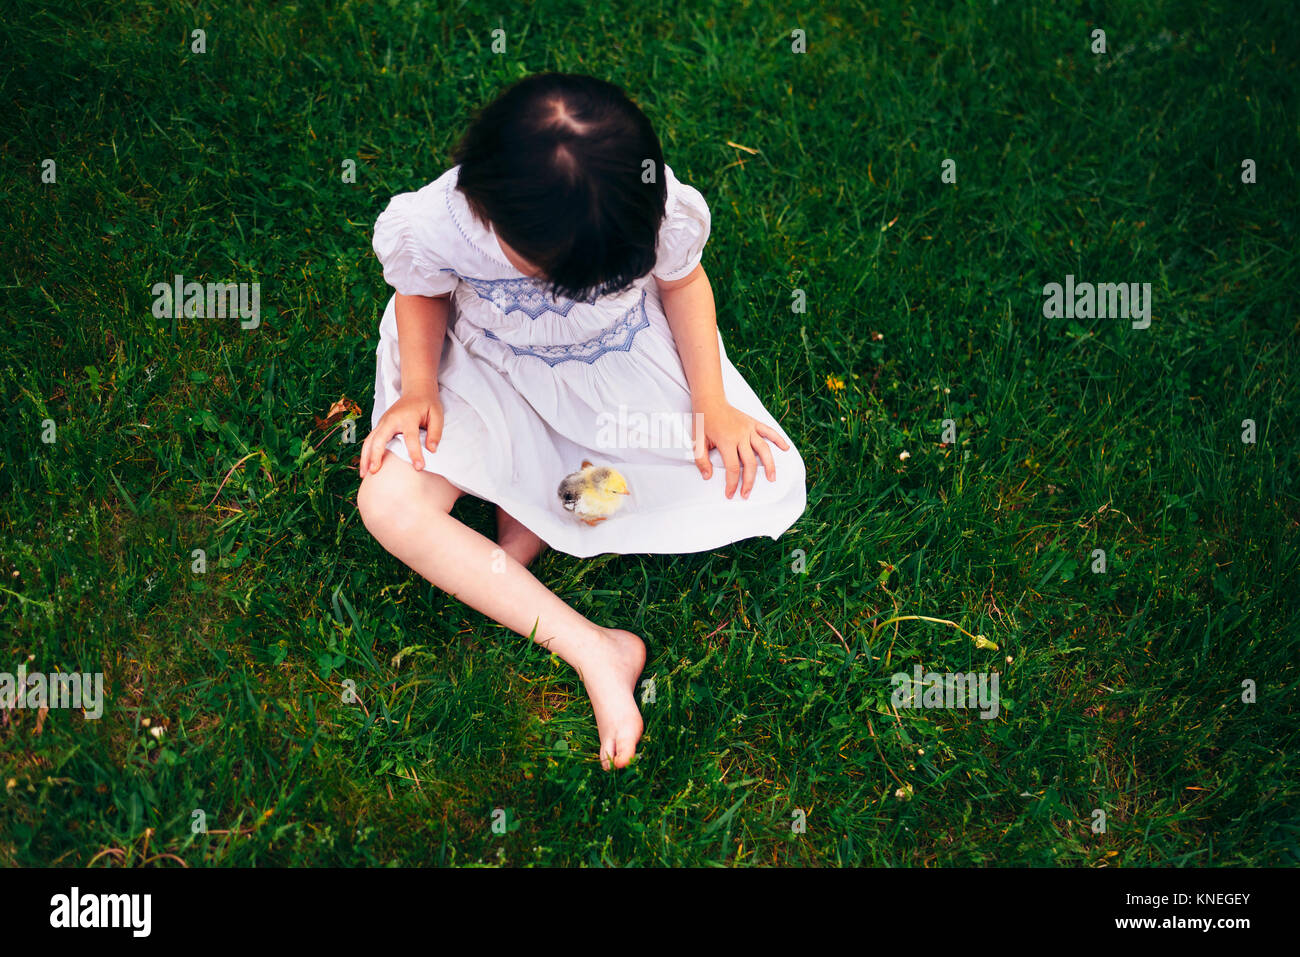 Girl sitting outside with a baby chick Stock Photo